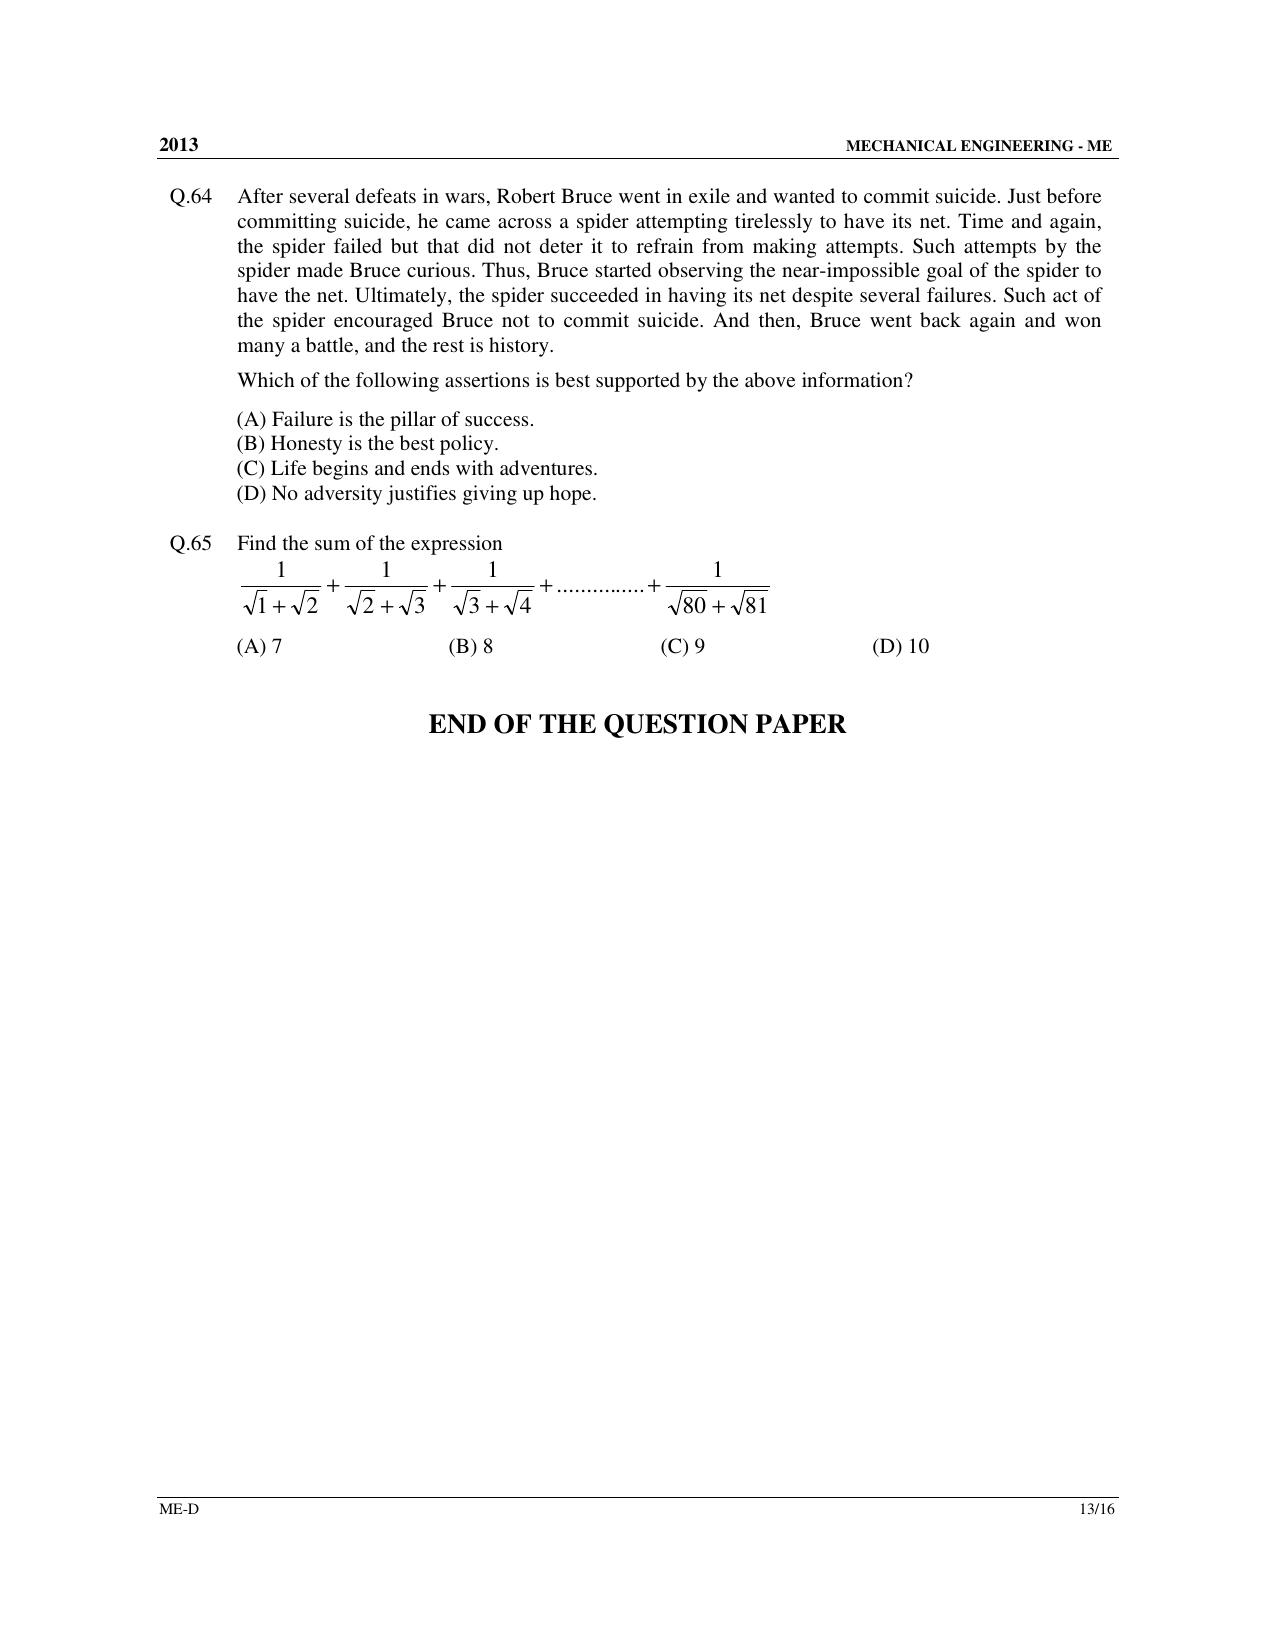 GATE 2013 Mechanical Engineering (ME) Question Paper with Answer Key - Page 56